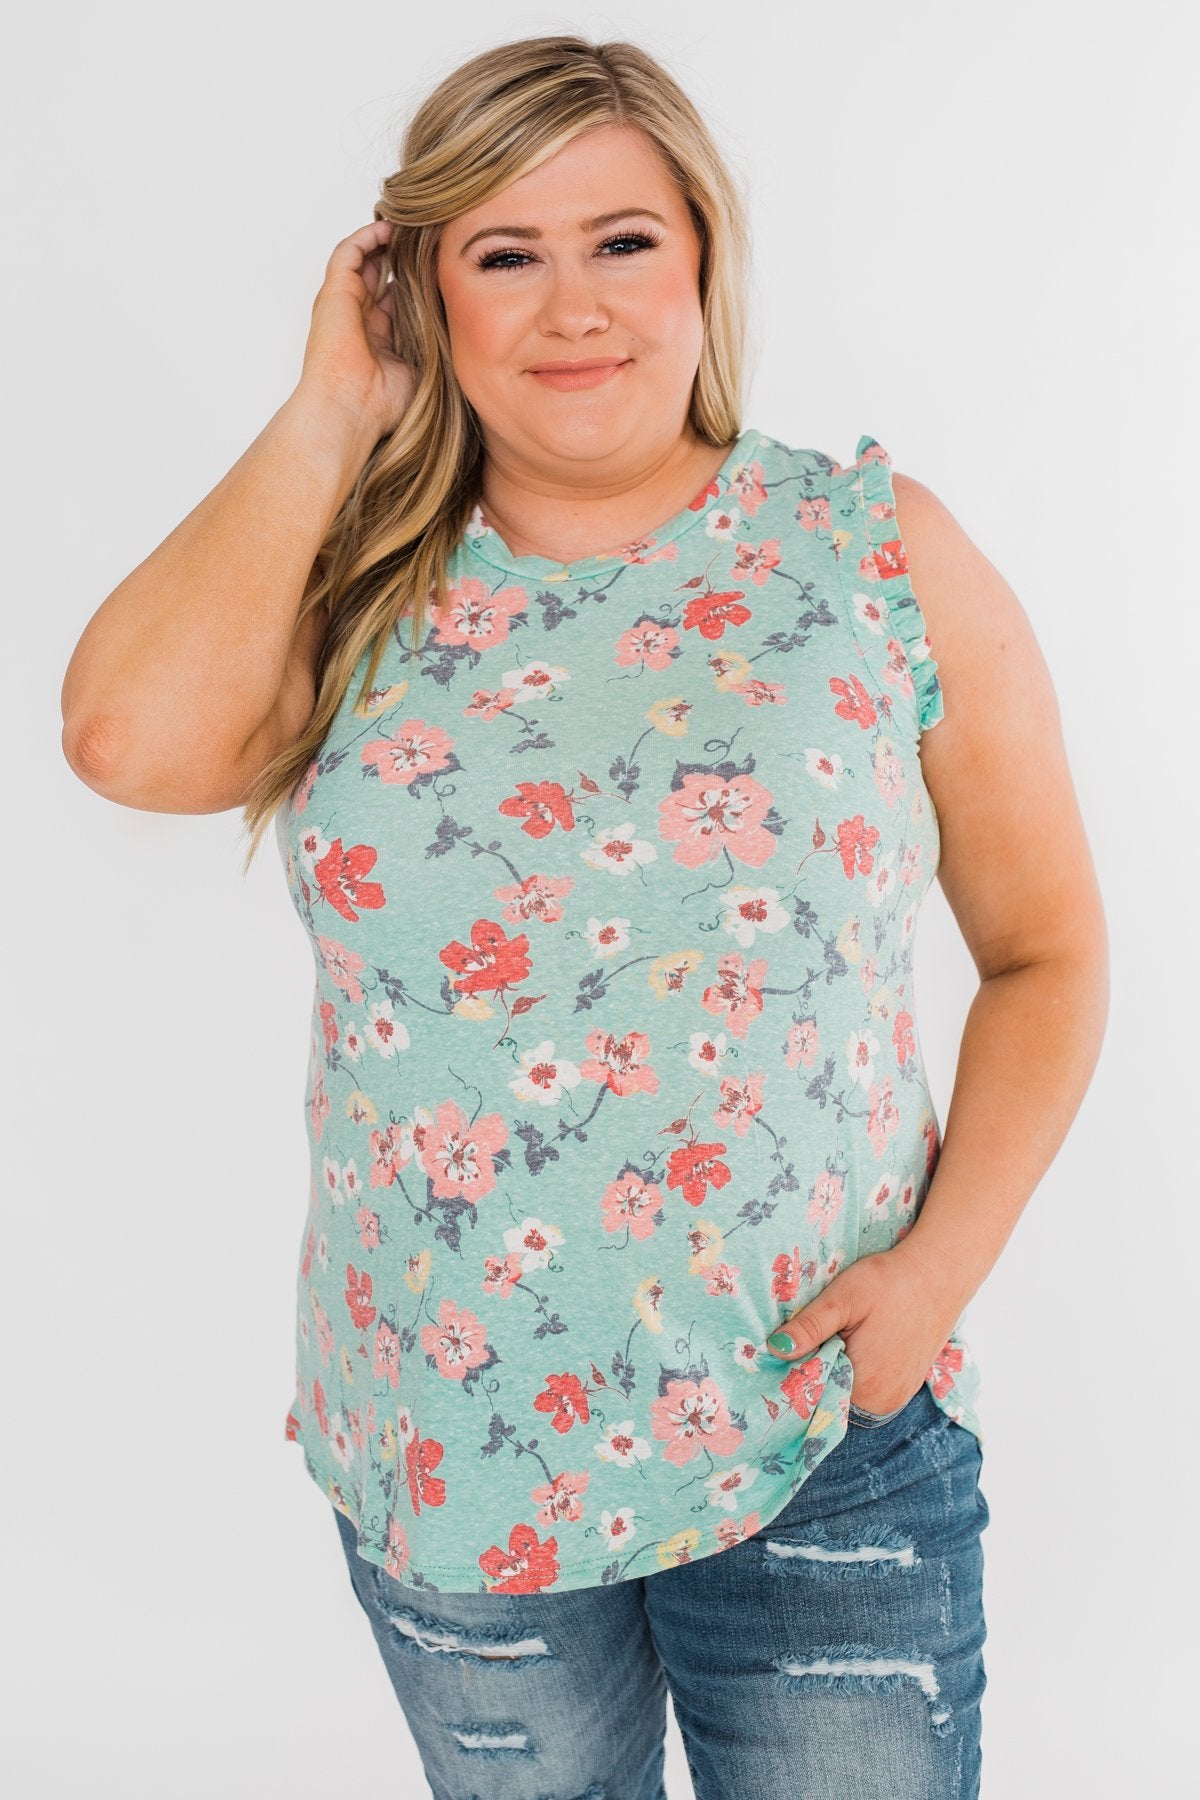 Sunny Day Picnic Ruffle Floral Top- Light Blue